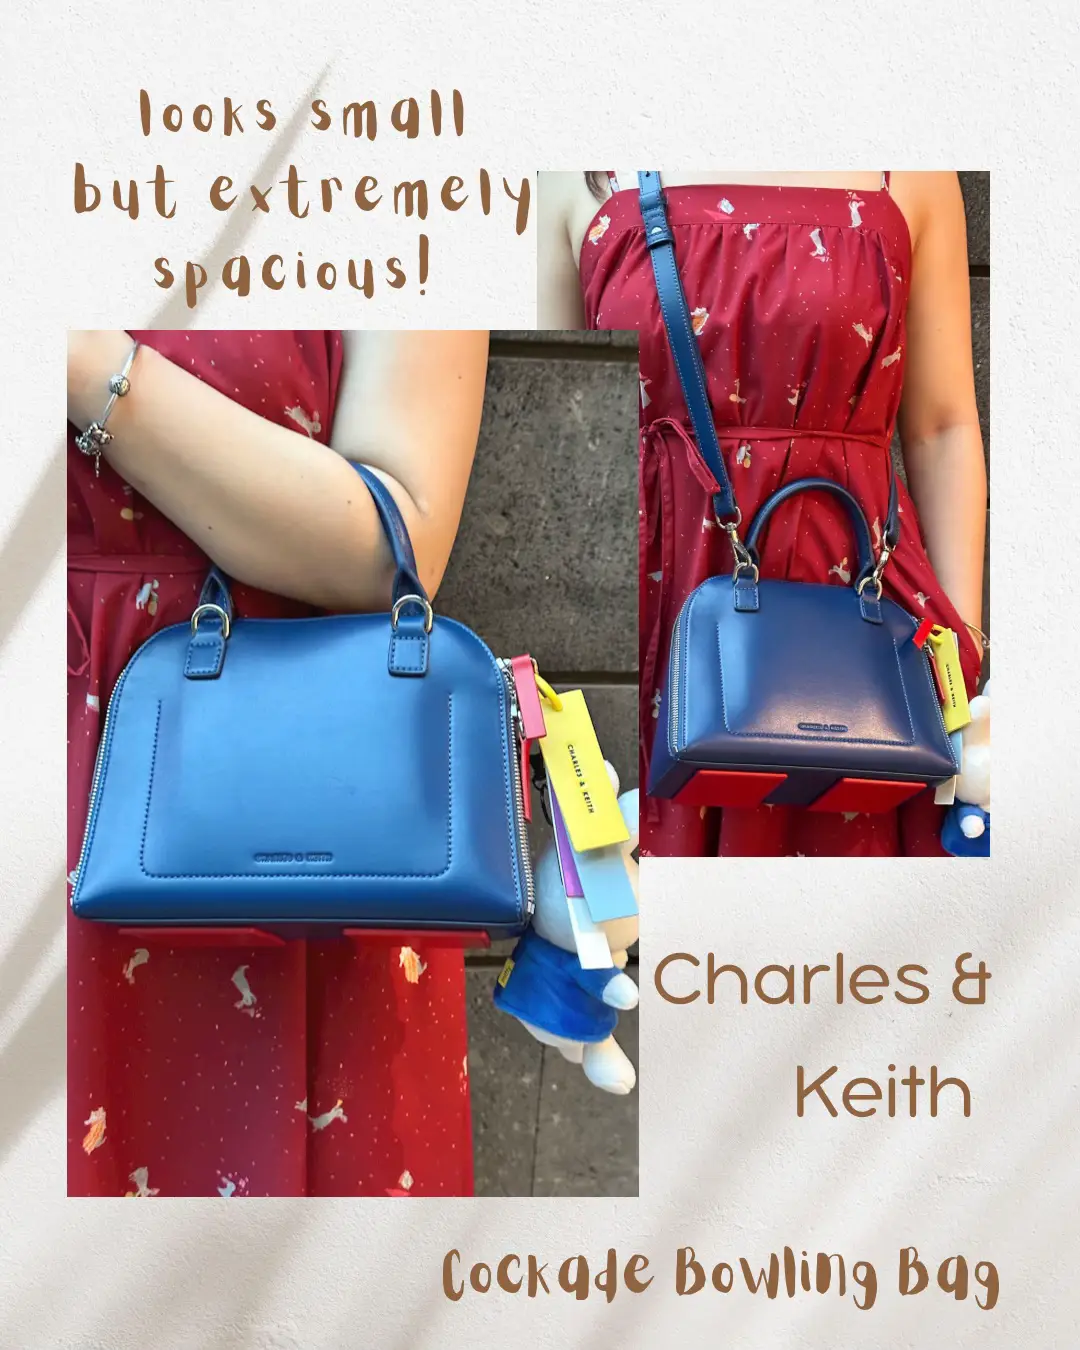 Classy & Compact Bag from Charles & Keith 😎, Gallery posted by Ems